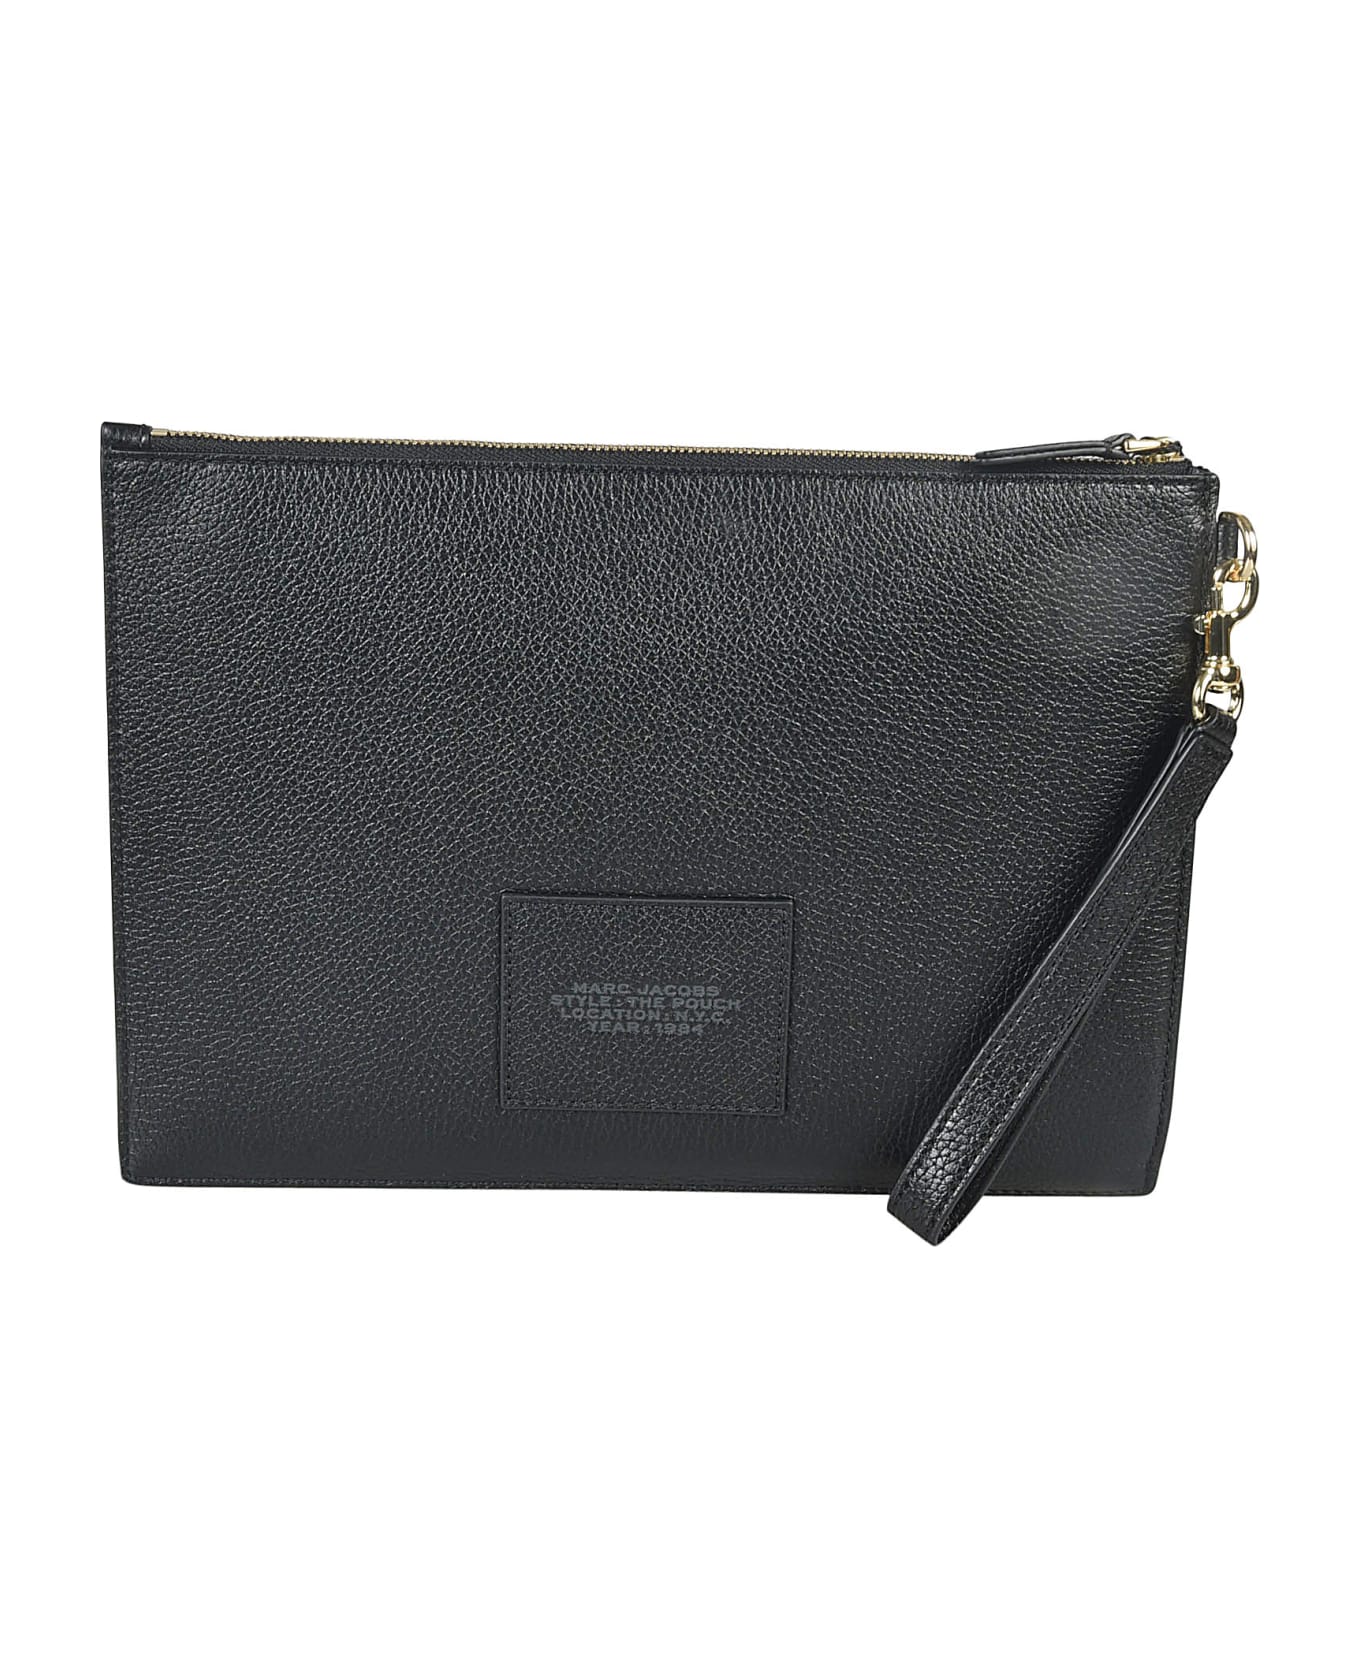 Marc Jacobs The Pouch Clutch - .